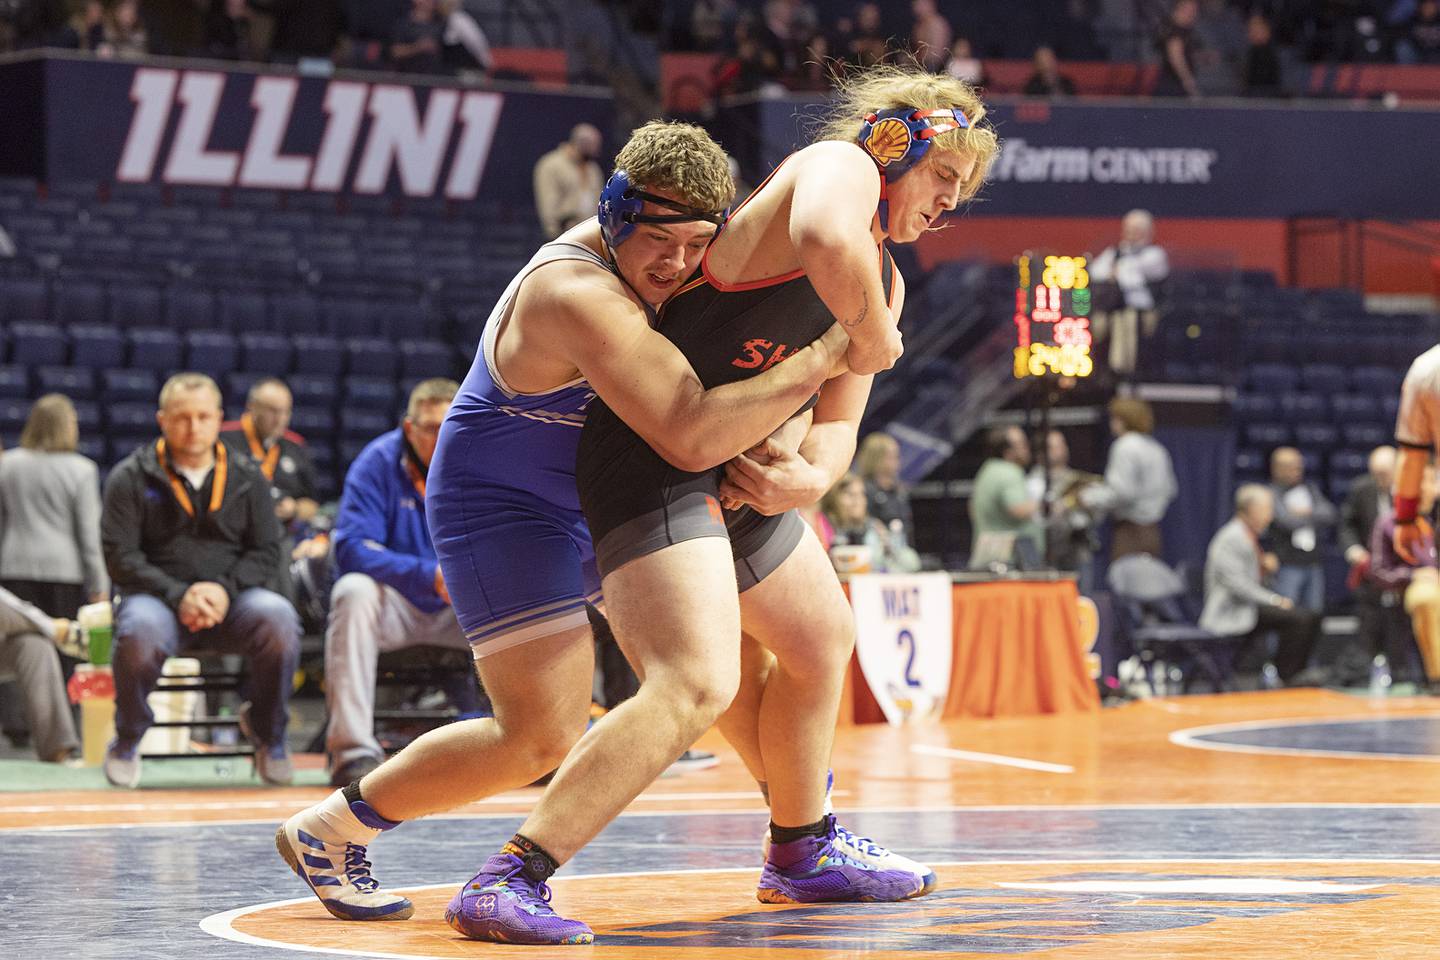 Princeton’s Cade Odell gets behind Roxana’s James Herring in the 285 pound 1A third place match Saturday, Feb. 17, 2024 at the IHSA state wrestling finals at the State Farm Center in Champaign.